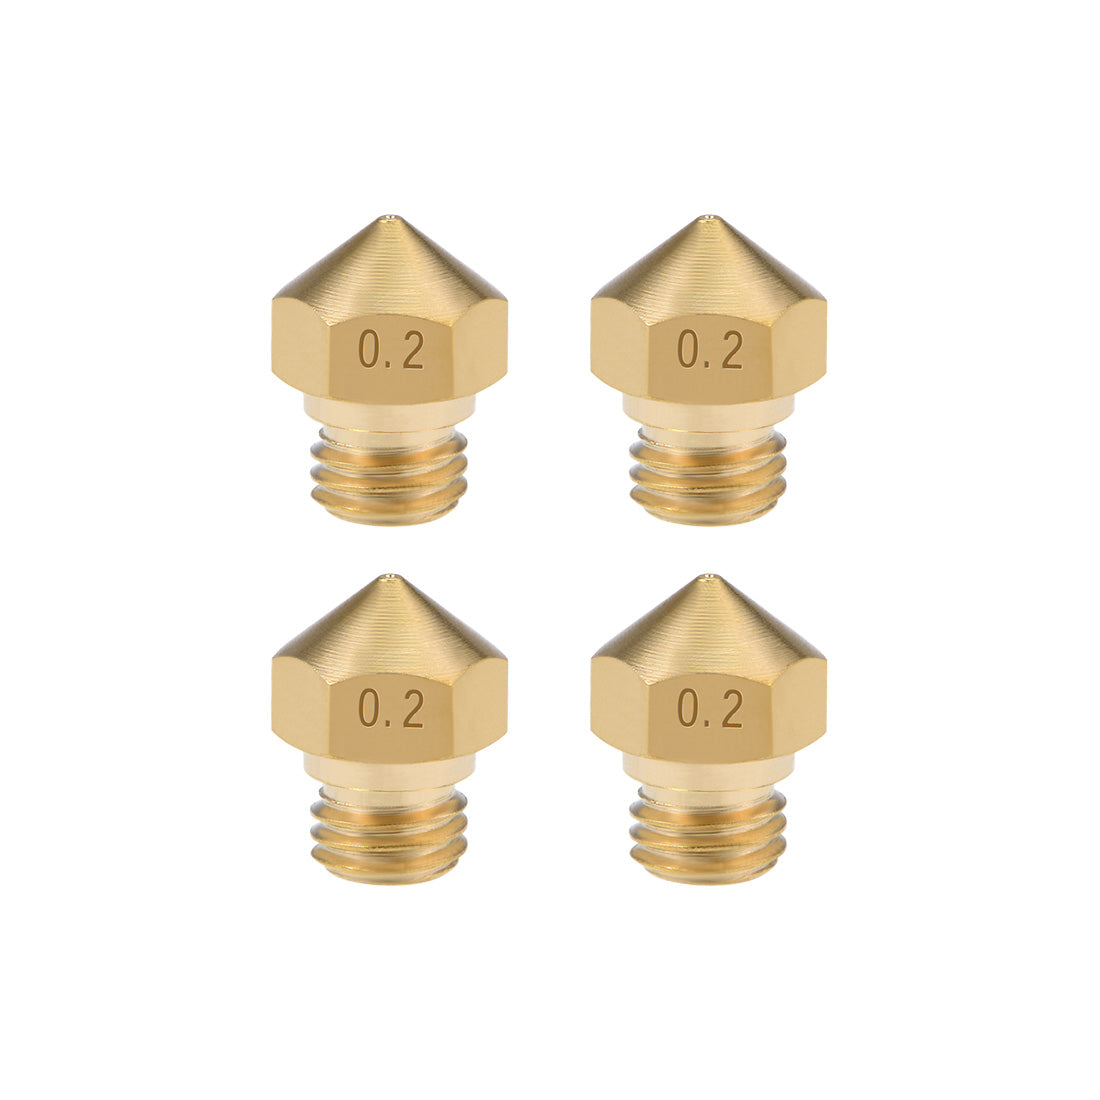 uxcell Uxcell 0.2mm 3D Printer Nozzle Head M7 Thread Replacement for MK10 1.75mm Extruder Print, Brass 4pcs